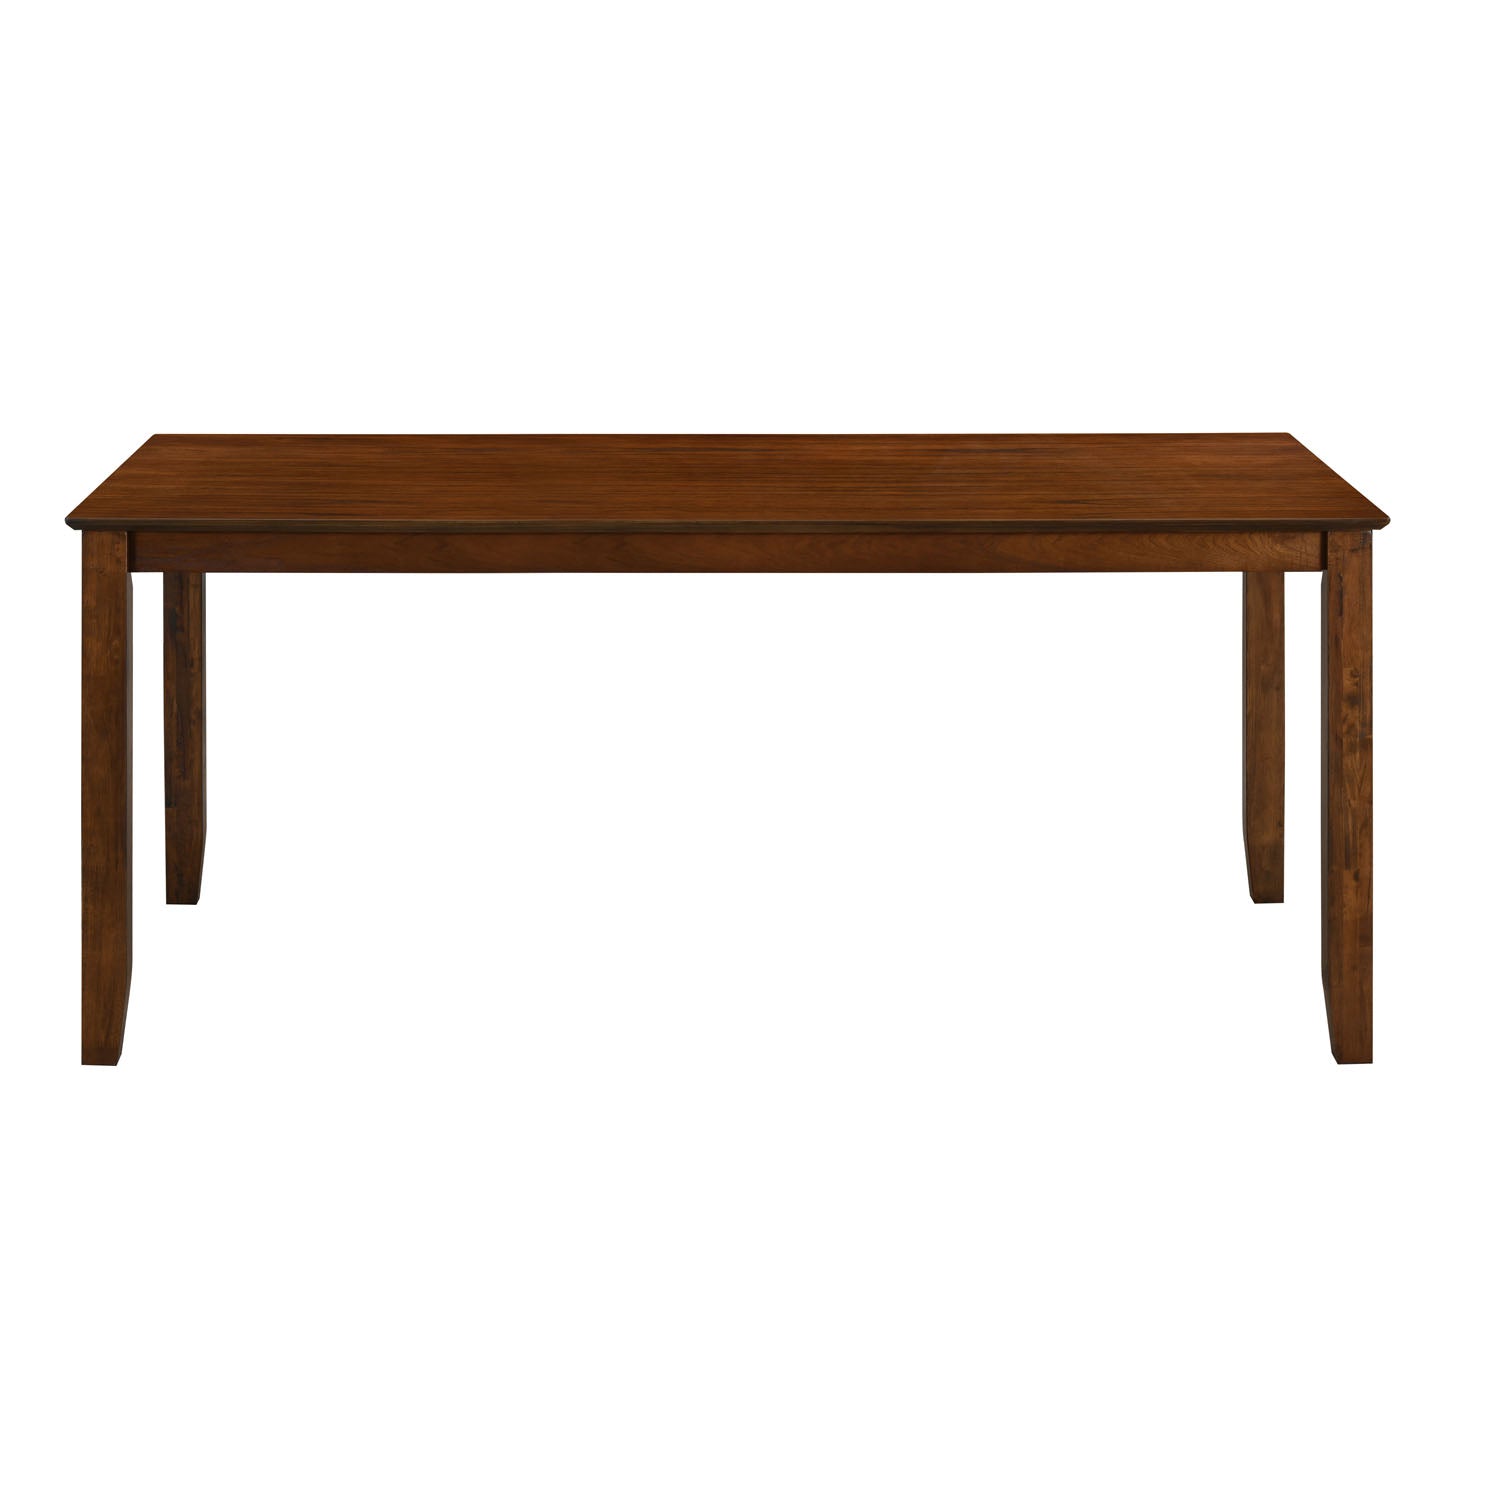 Carter Solid Wood 6 seater Dining Table (Antique Oak)